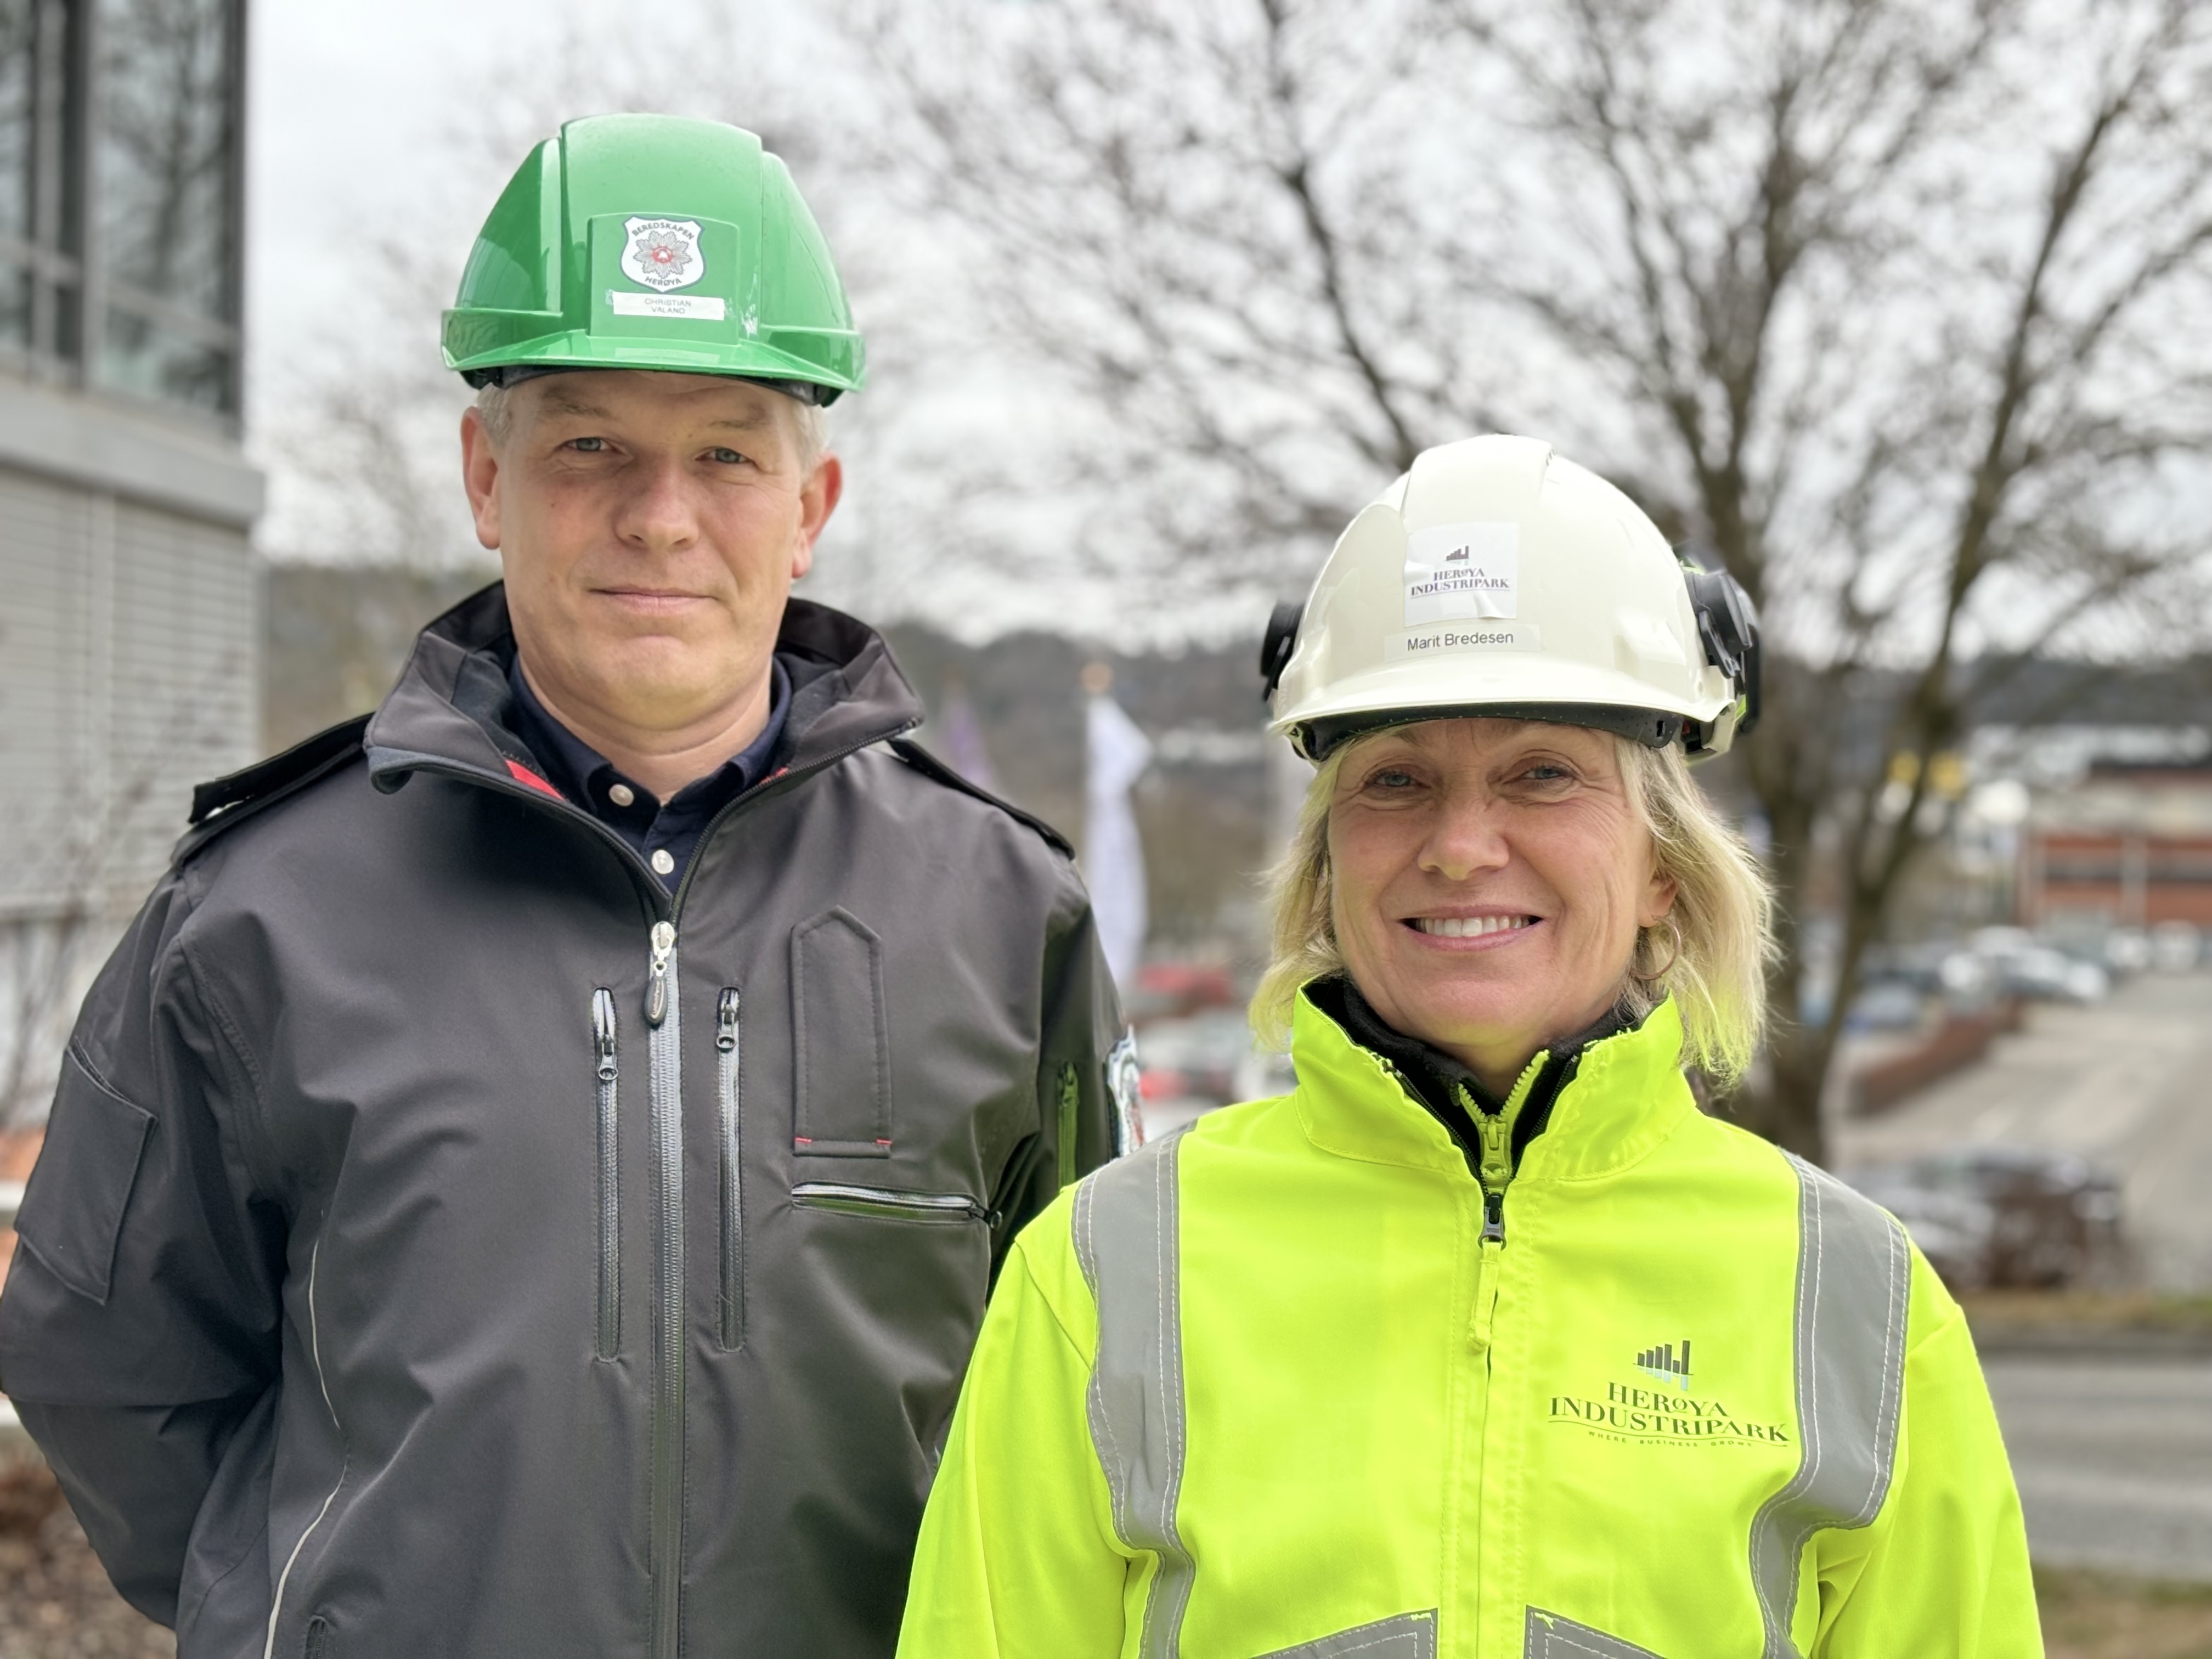 man and woman, portrait, posing, PPE, parking space in background